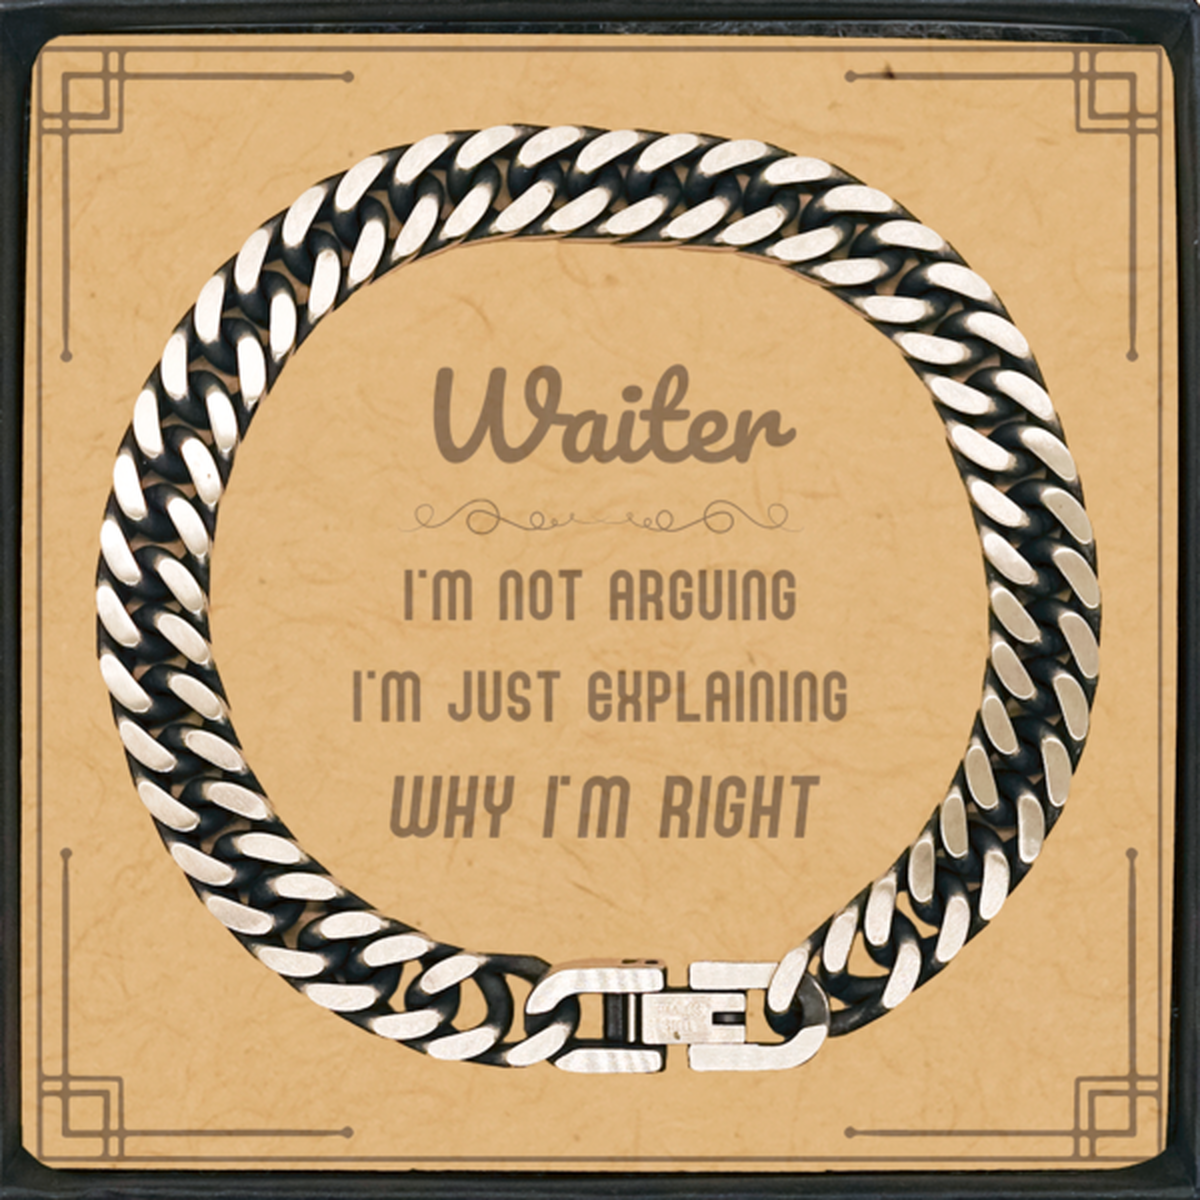 Waiter I'm not Arguing. I'm Just Explaining Why I'm RIGHT Cuban Link Chain Bracelet, Funny Saying Quote Waiter Gifts For Waiter Message Card Graduation Birthday Christmas Gifts for Men Women Coworker